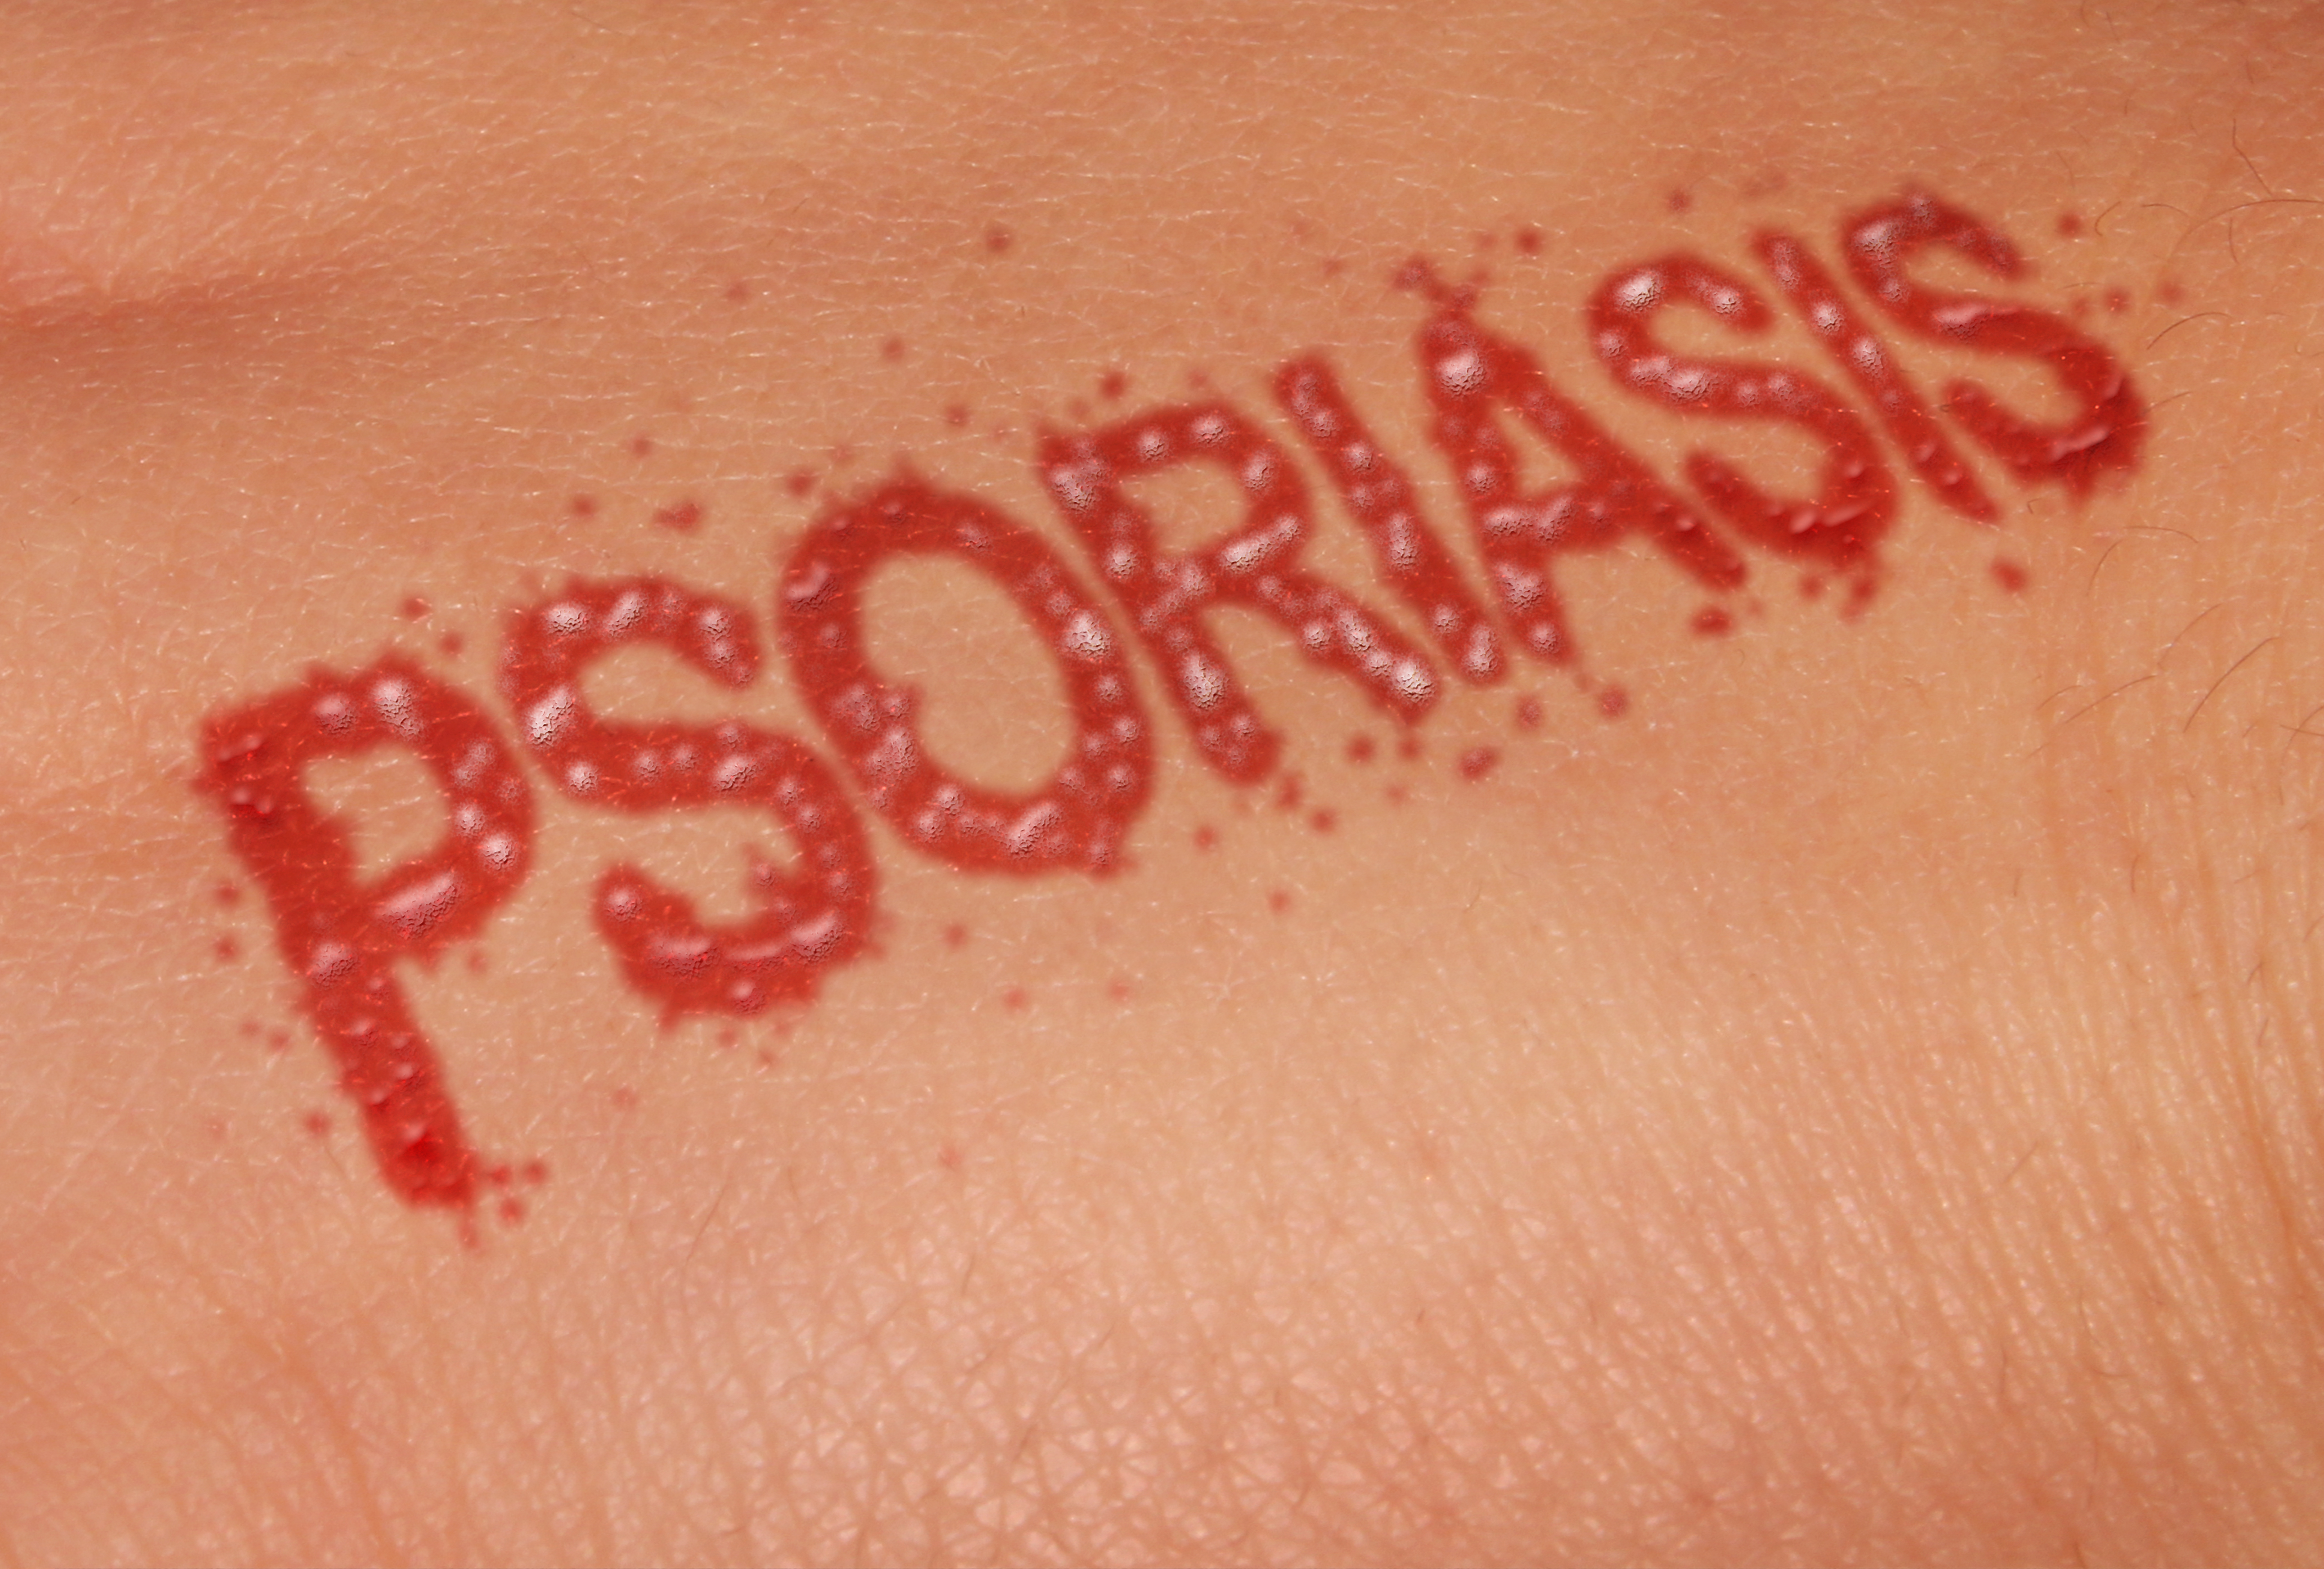 When should I visit a dermatologist for psoriasis in Charlotte, NC?